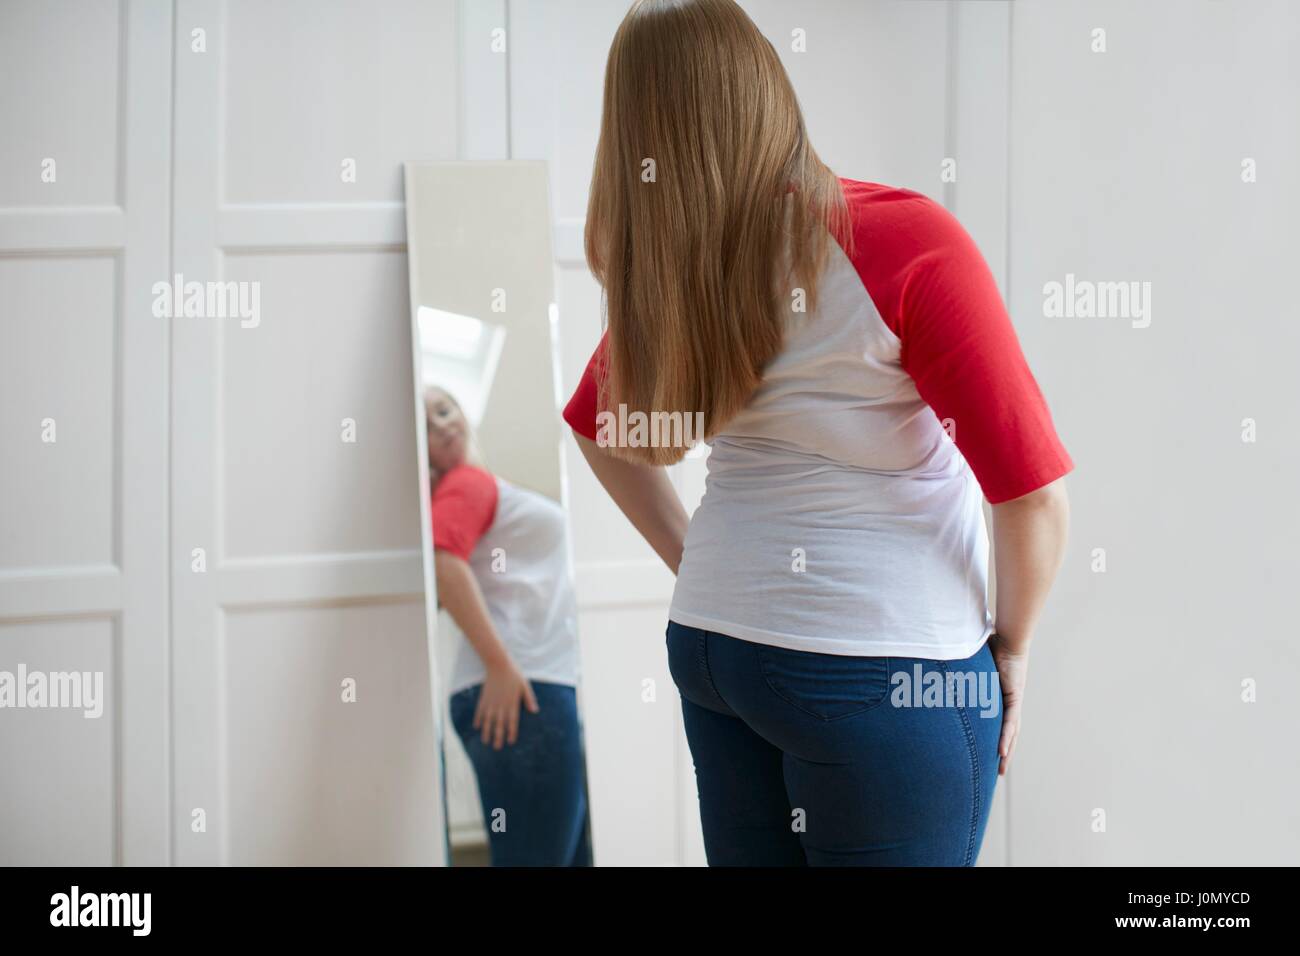 Young woman looking at reflection in mirror. Stock Photo